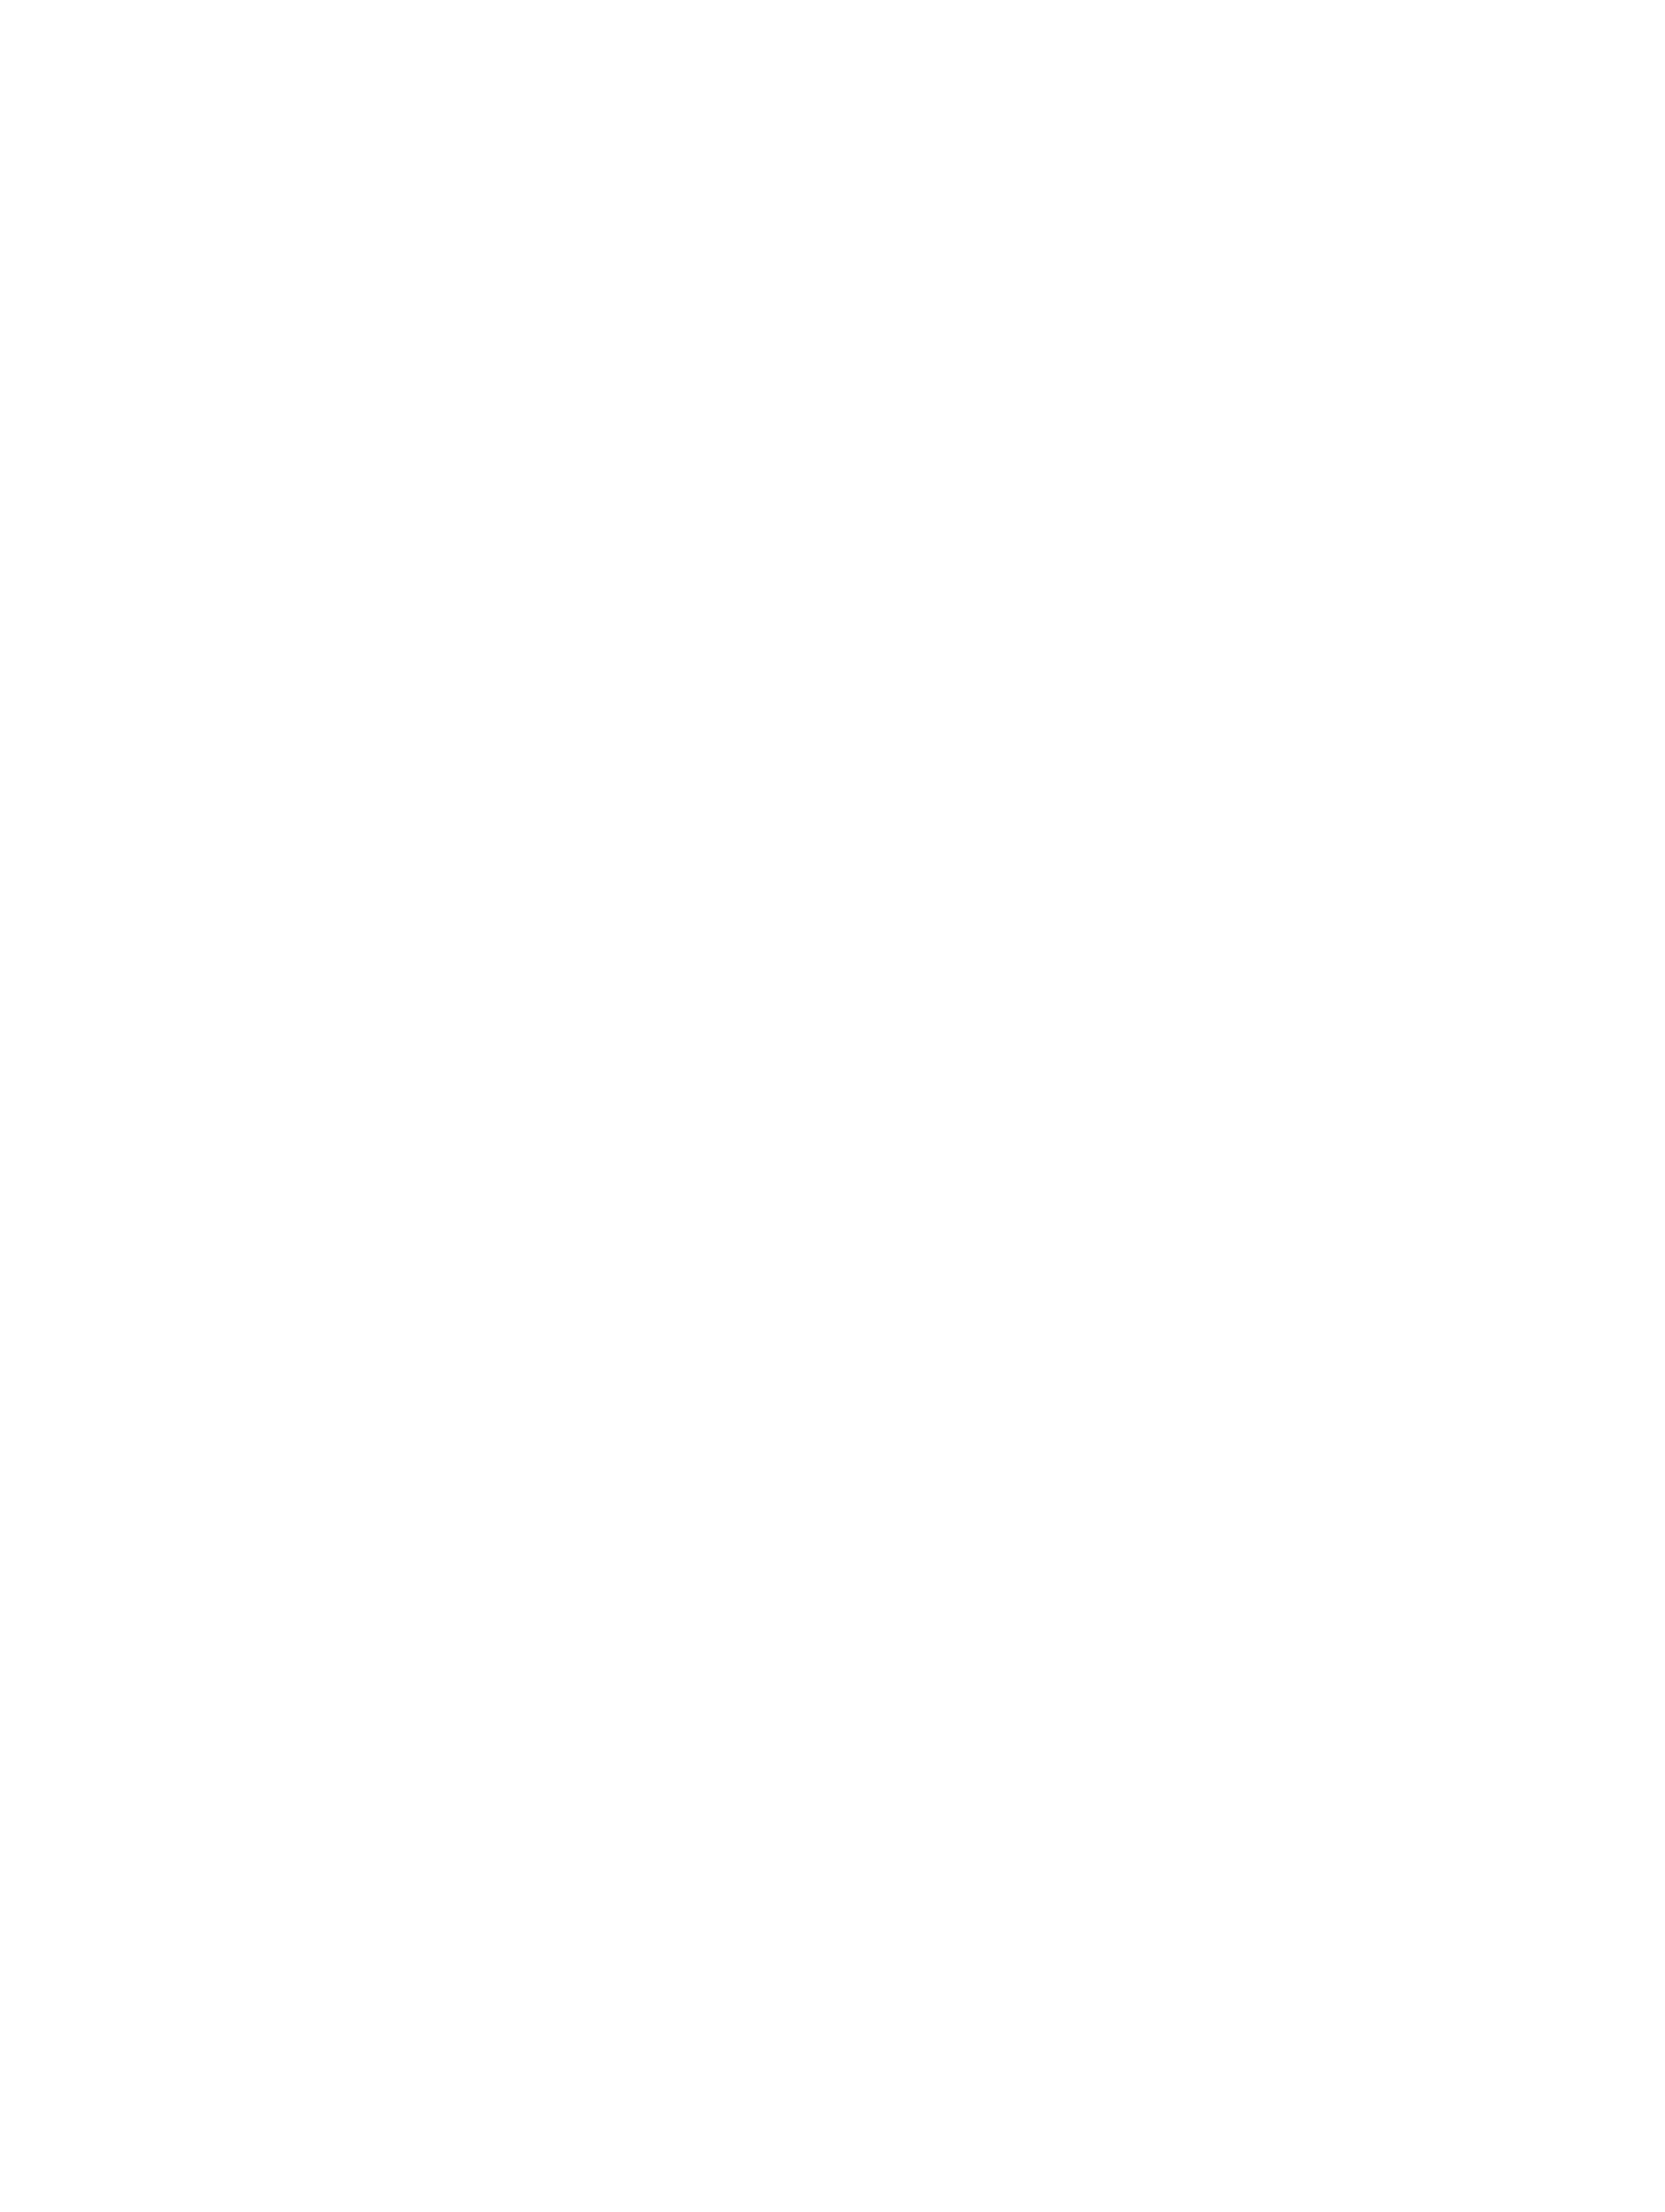 10 Years of experience